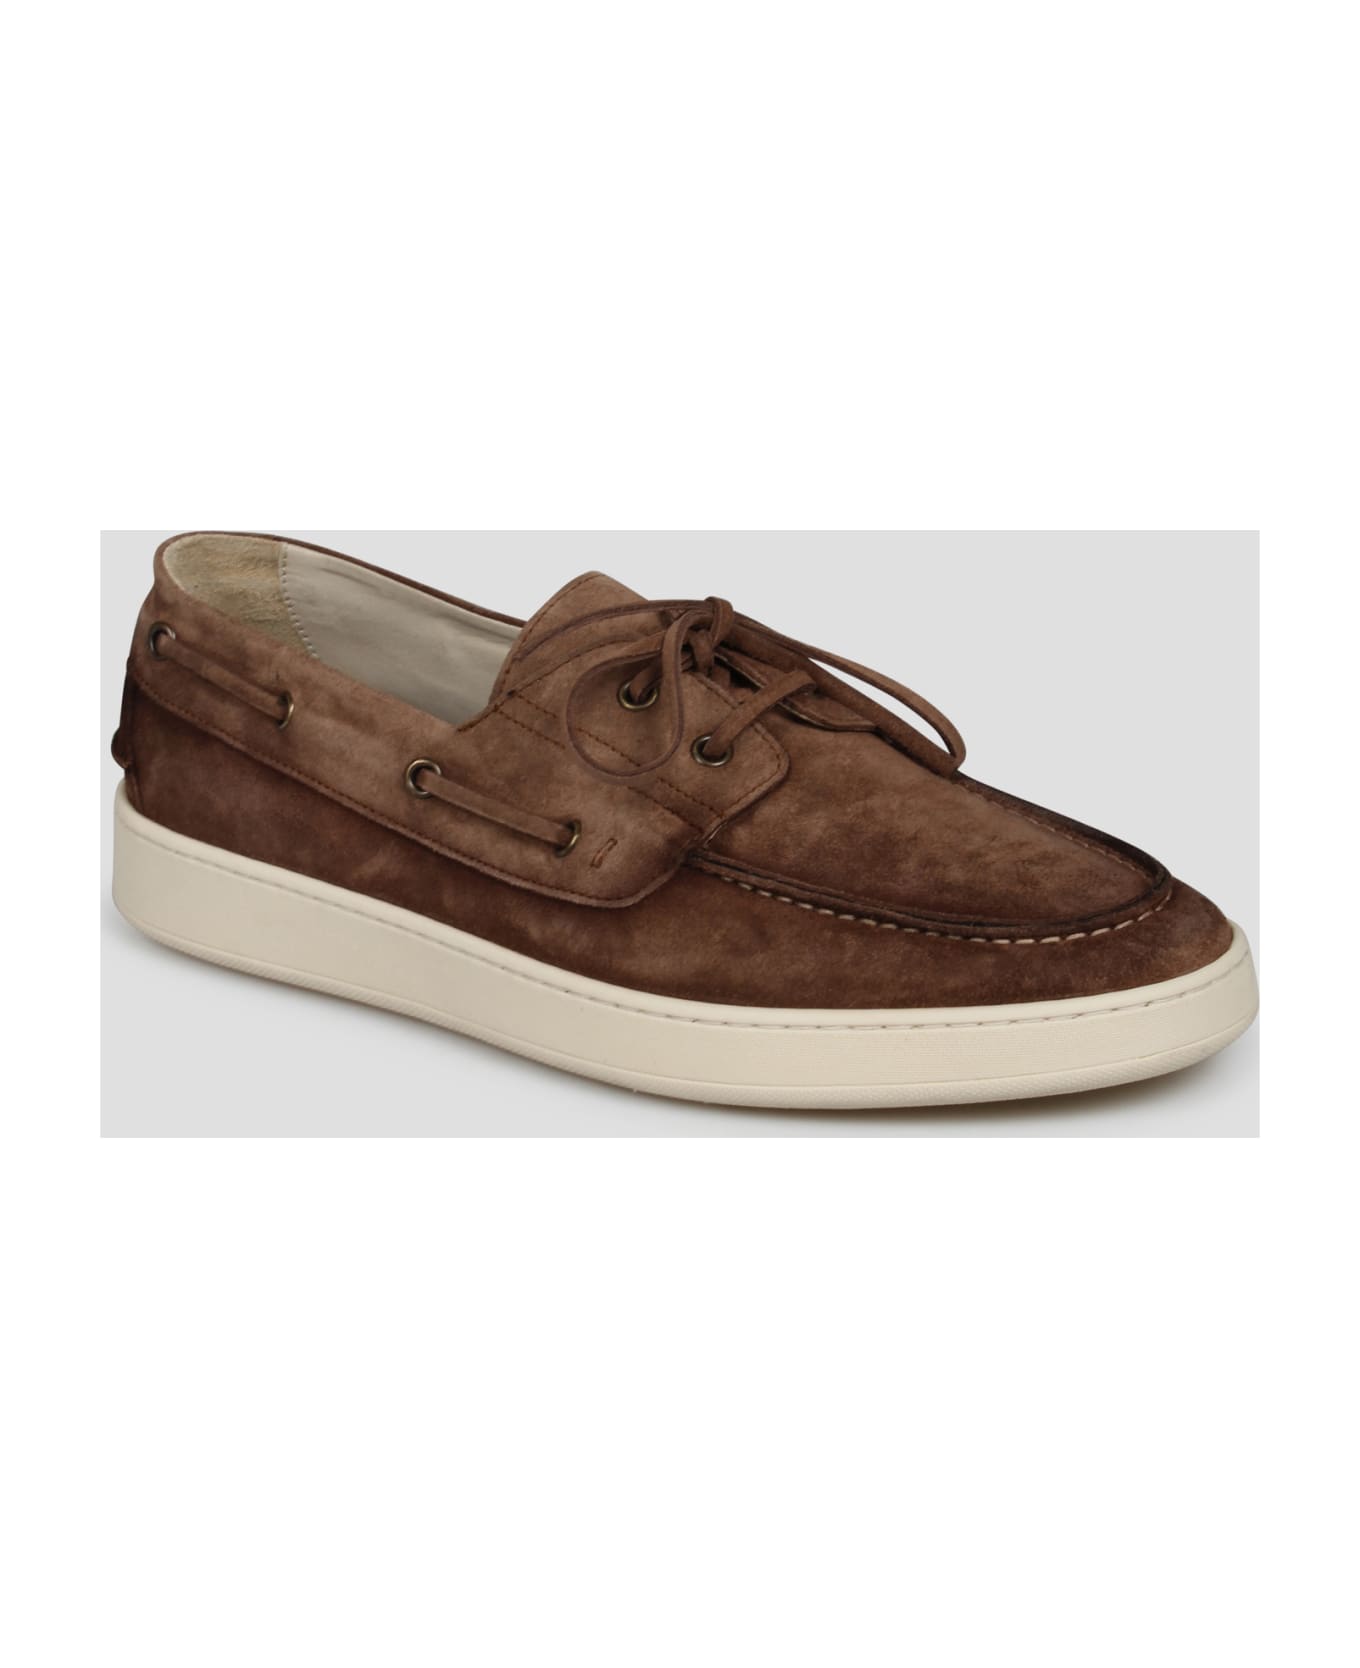 Corvari Suede Boat Loafers - Brown